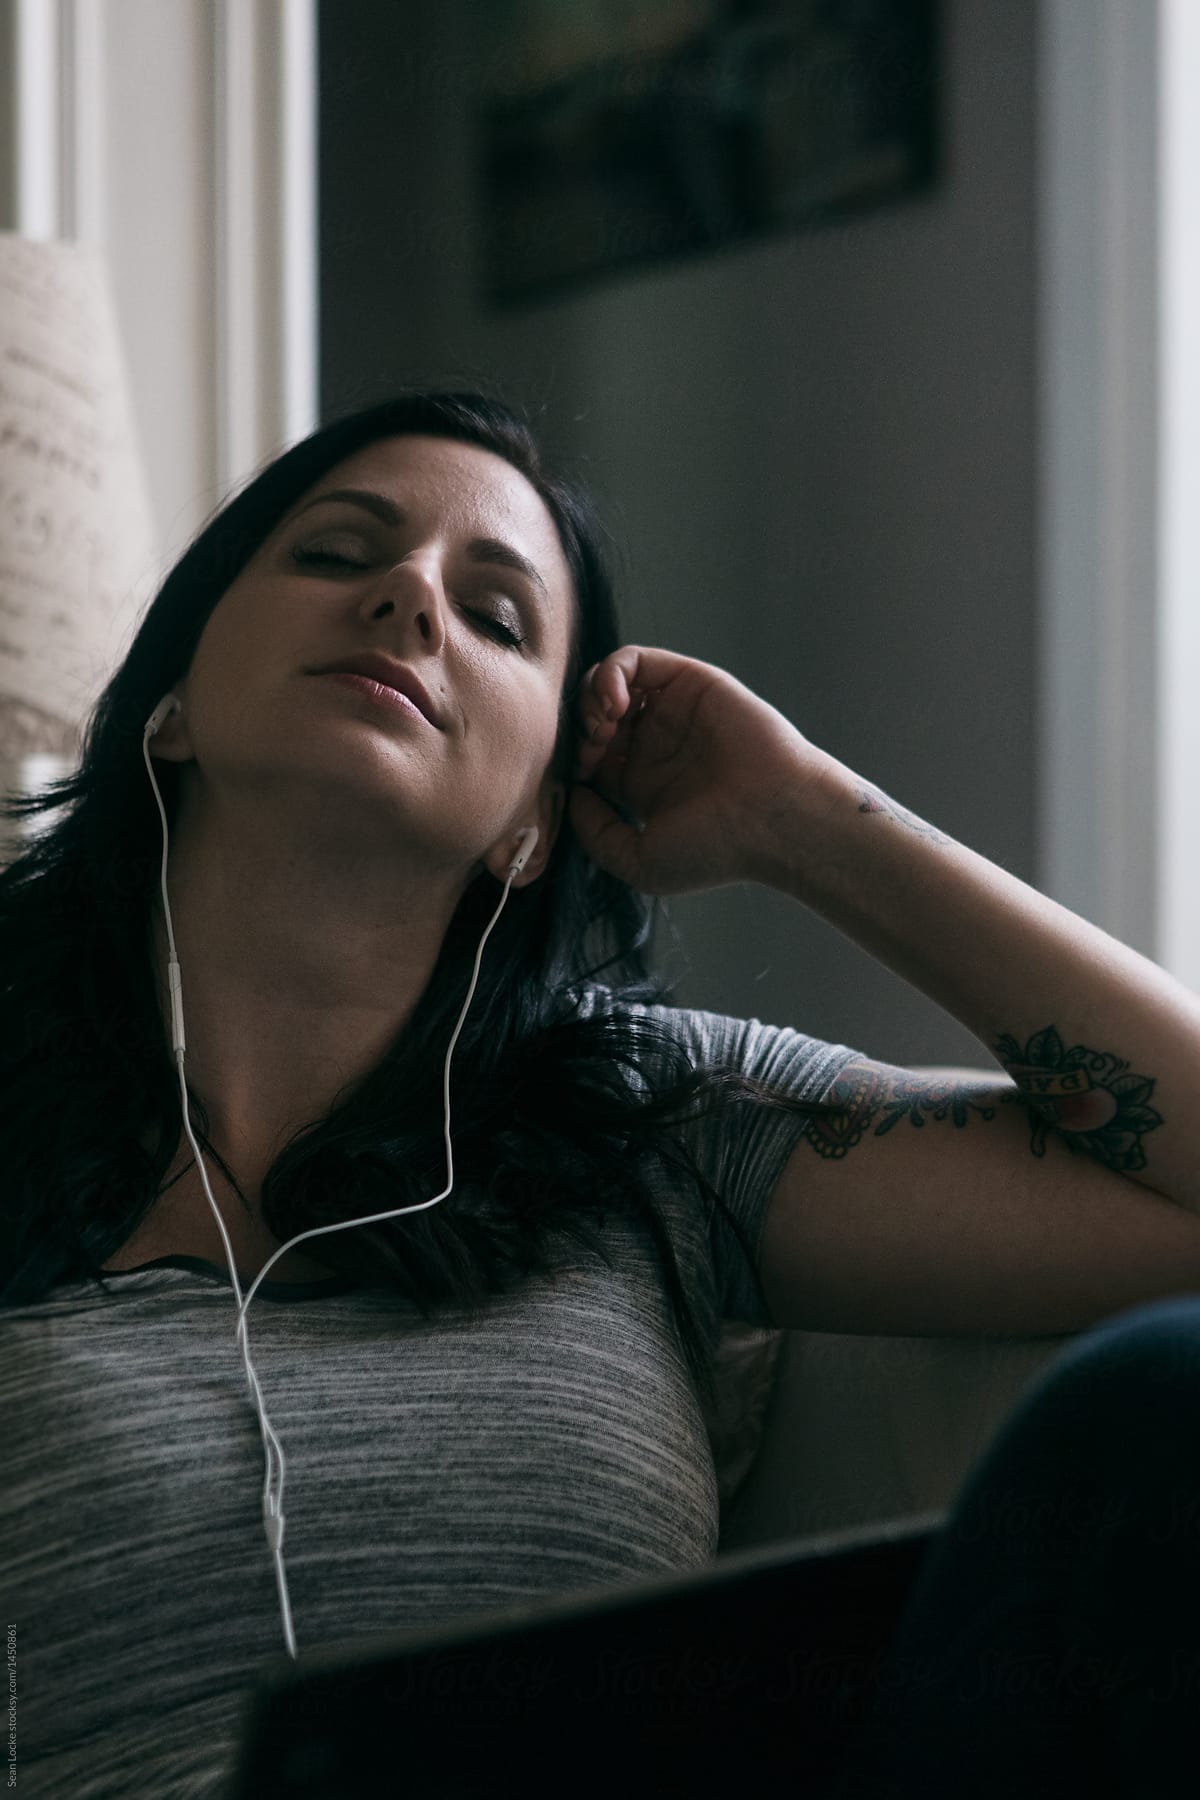 Tunes: Woman Relaxes On Couch Listening To Music